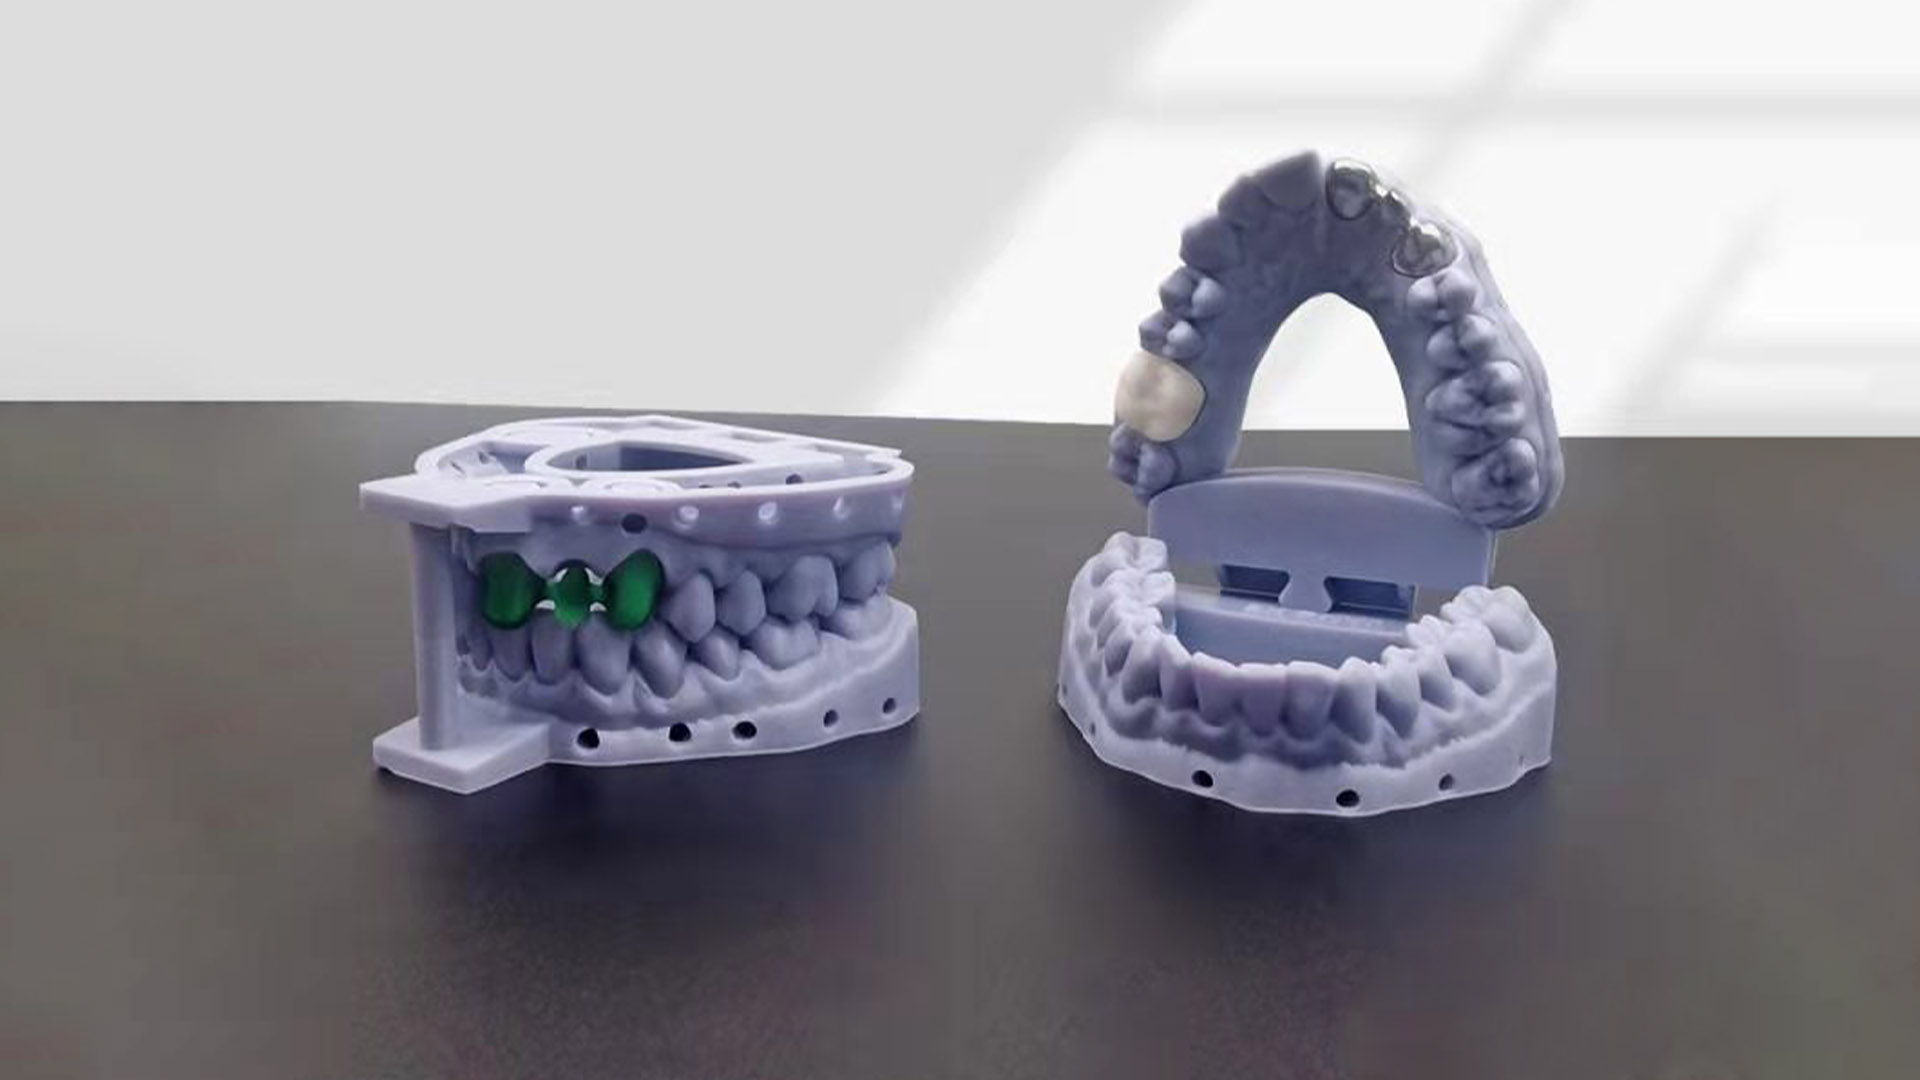 What Is The Cost, Efficiency And Market Acceptance Of 3D Printing Dental Models?